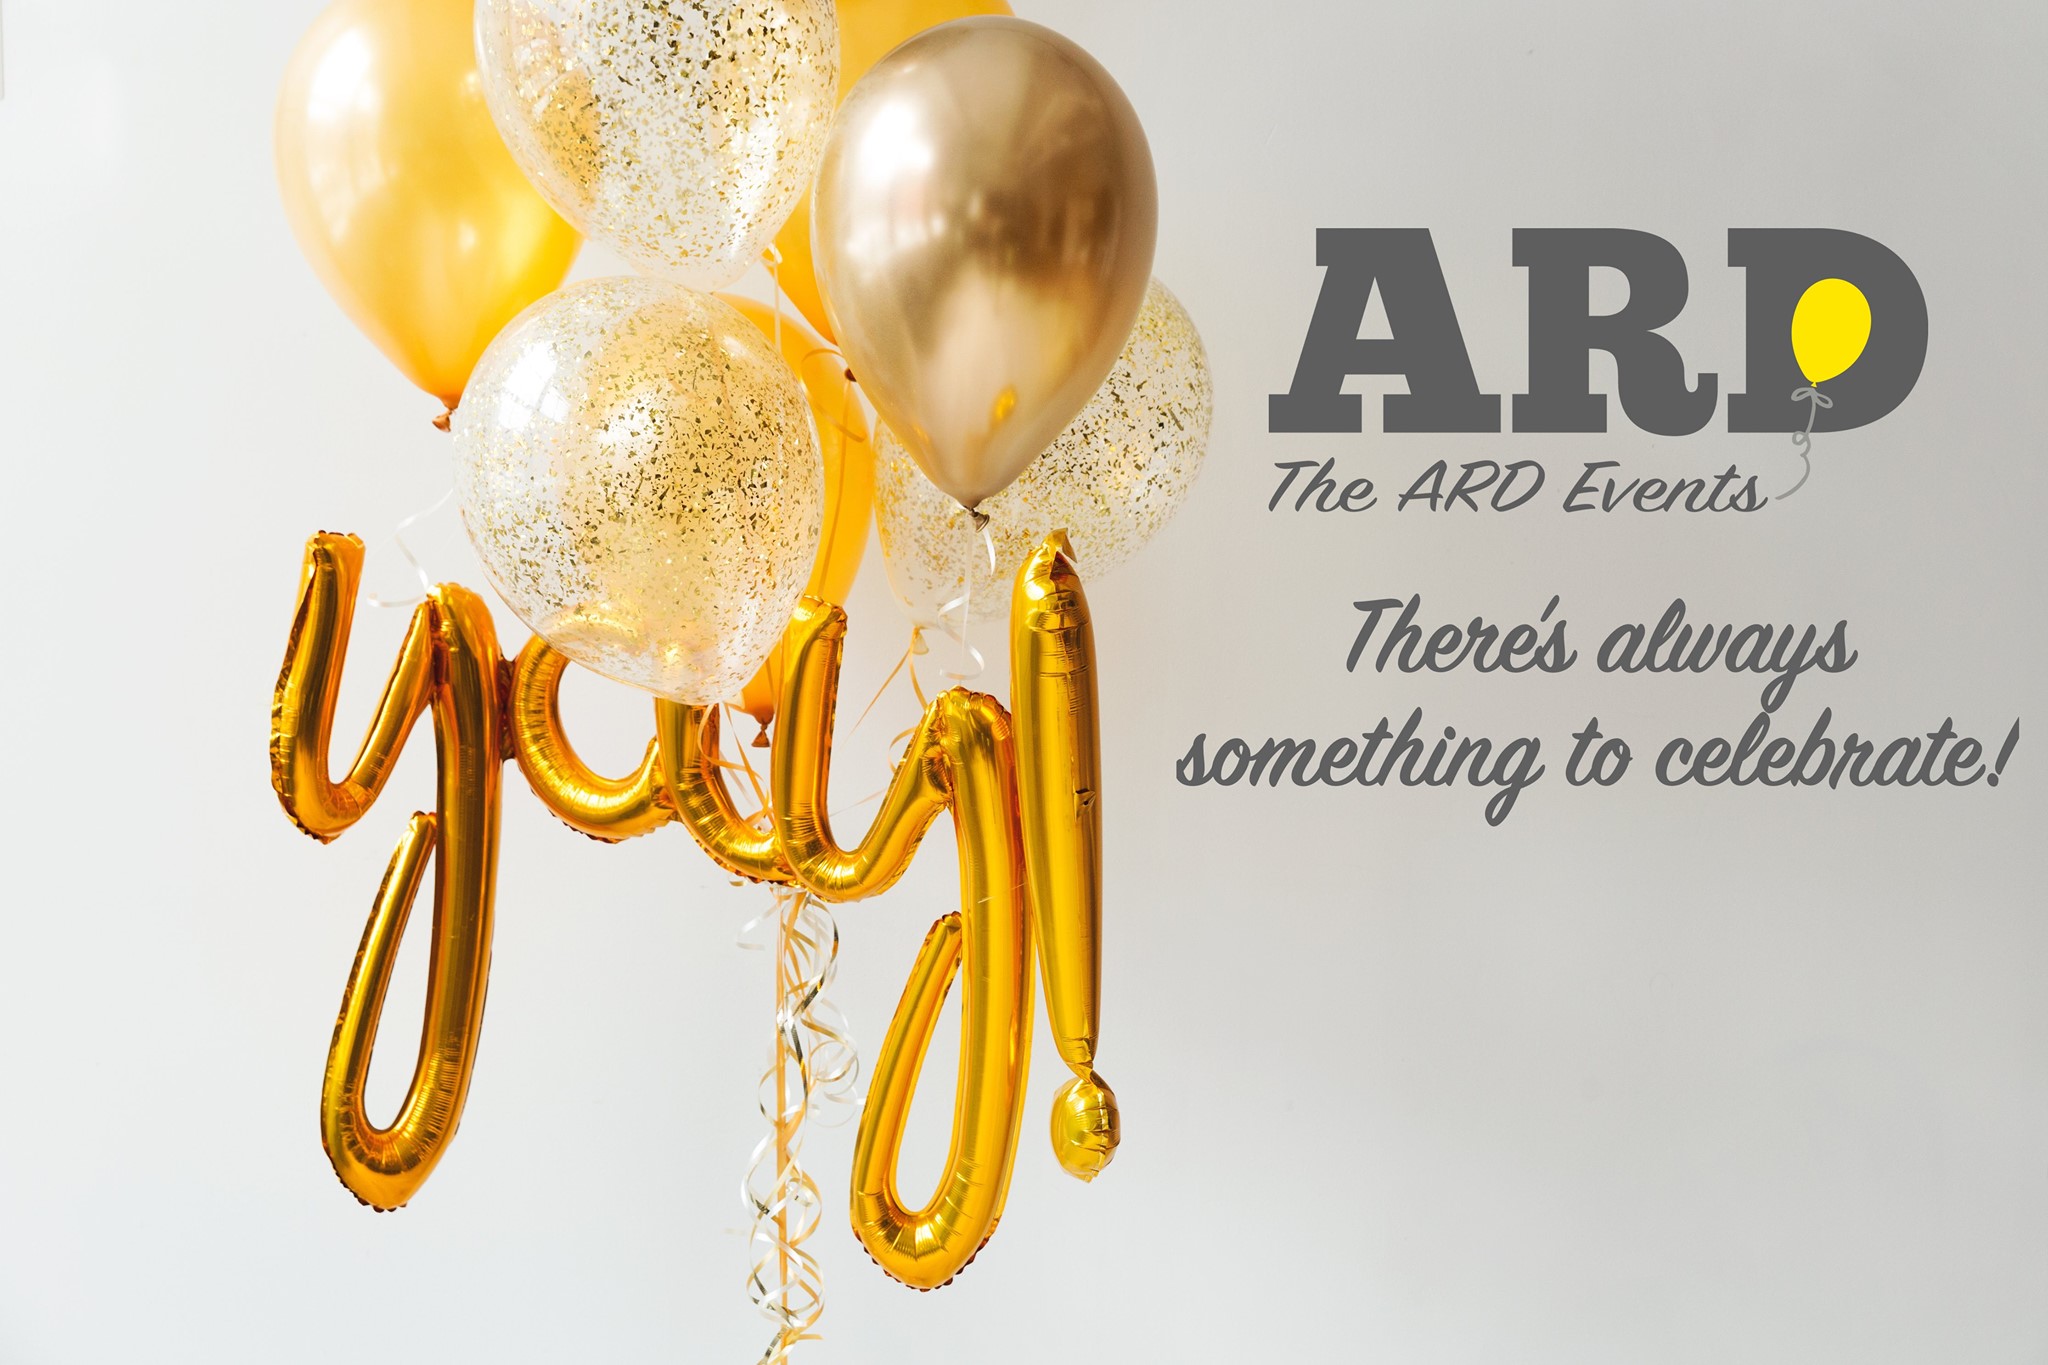 The Ard Events